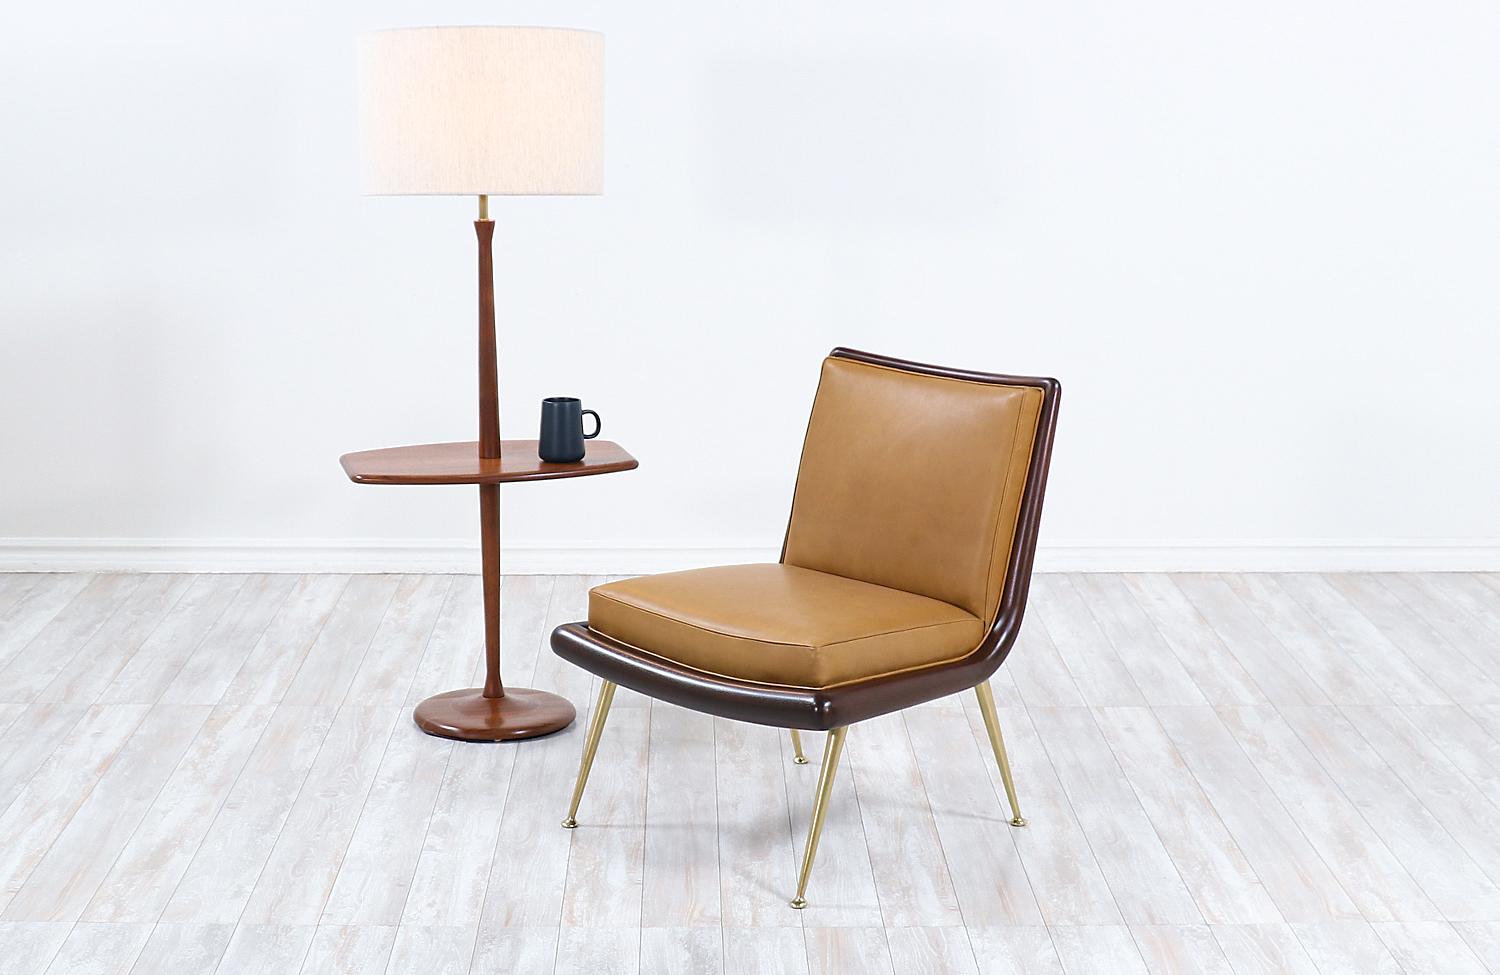 Mid-Century Modern sculpted walnut floor lamp with side table by Laurel.

Dimensions:
53in H x 22in W x 14.5in D
Lamp shade: 12in H x 18in W
Side table height 21in.